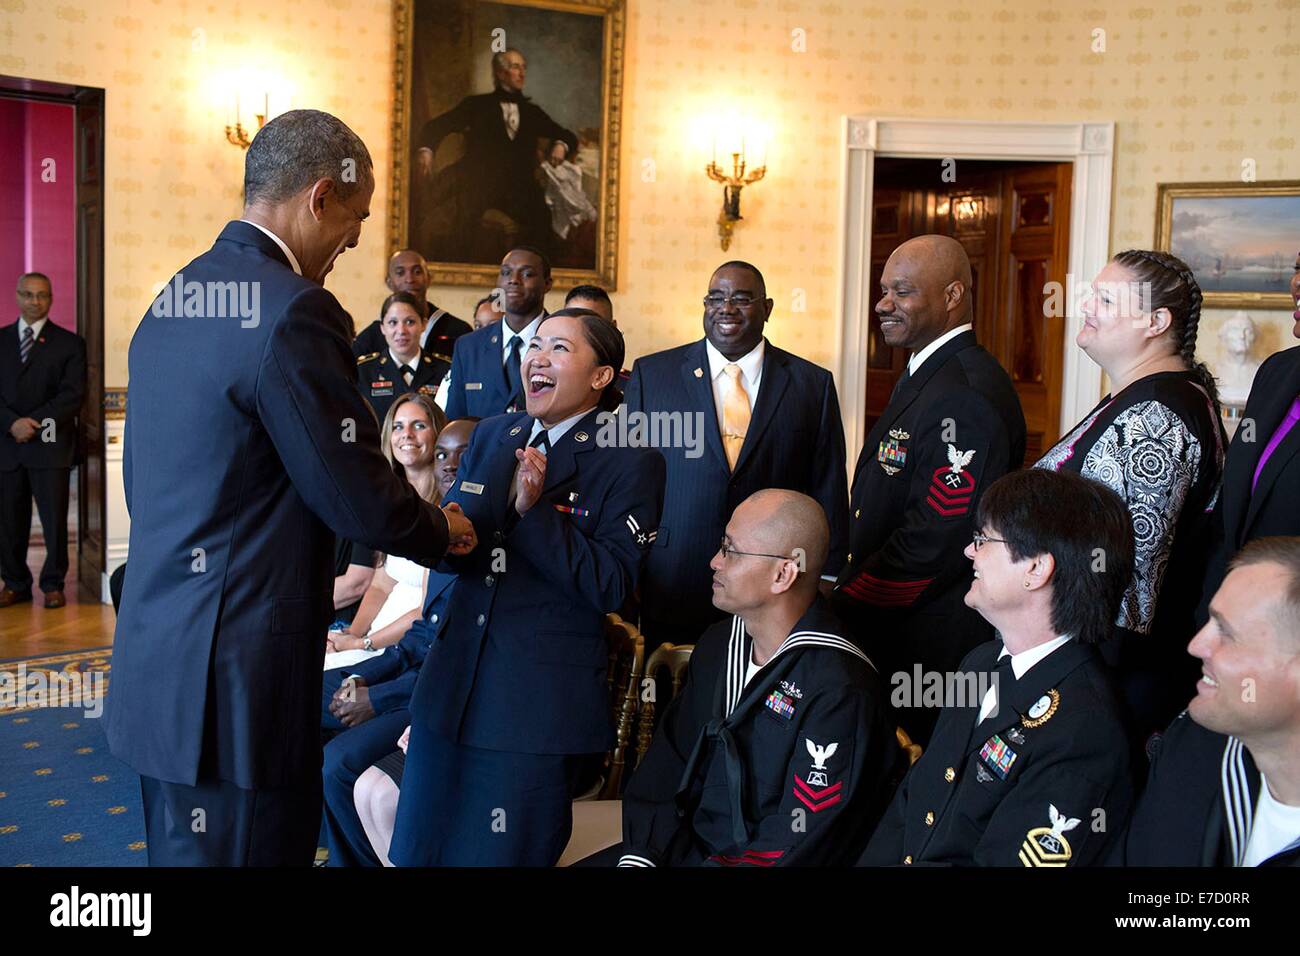 US President Barack Obama greets Airman First Class Karen Mae Manalo with other citizenship candidates in the Blue Room prior to a naturalization ceremony for active duty military, military dependents, reservists and veterans at the White House July 4, 2014 in Washington, DC. Stock Photo